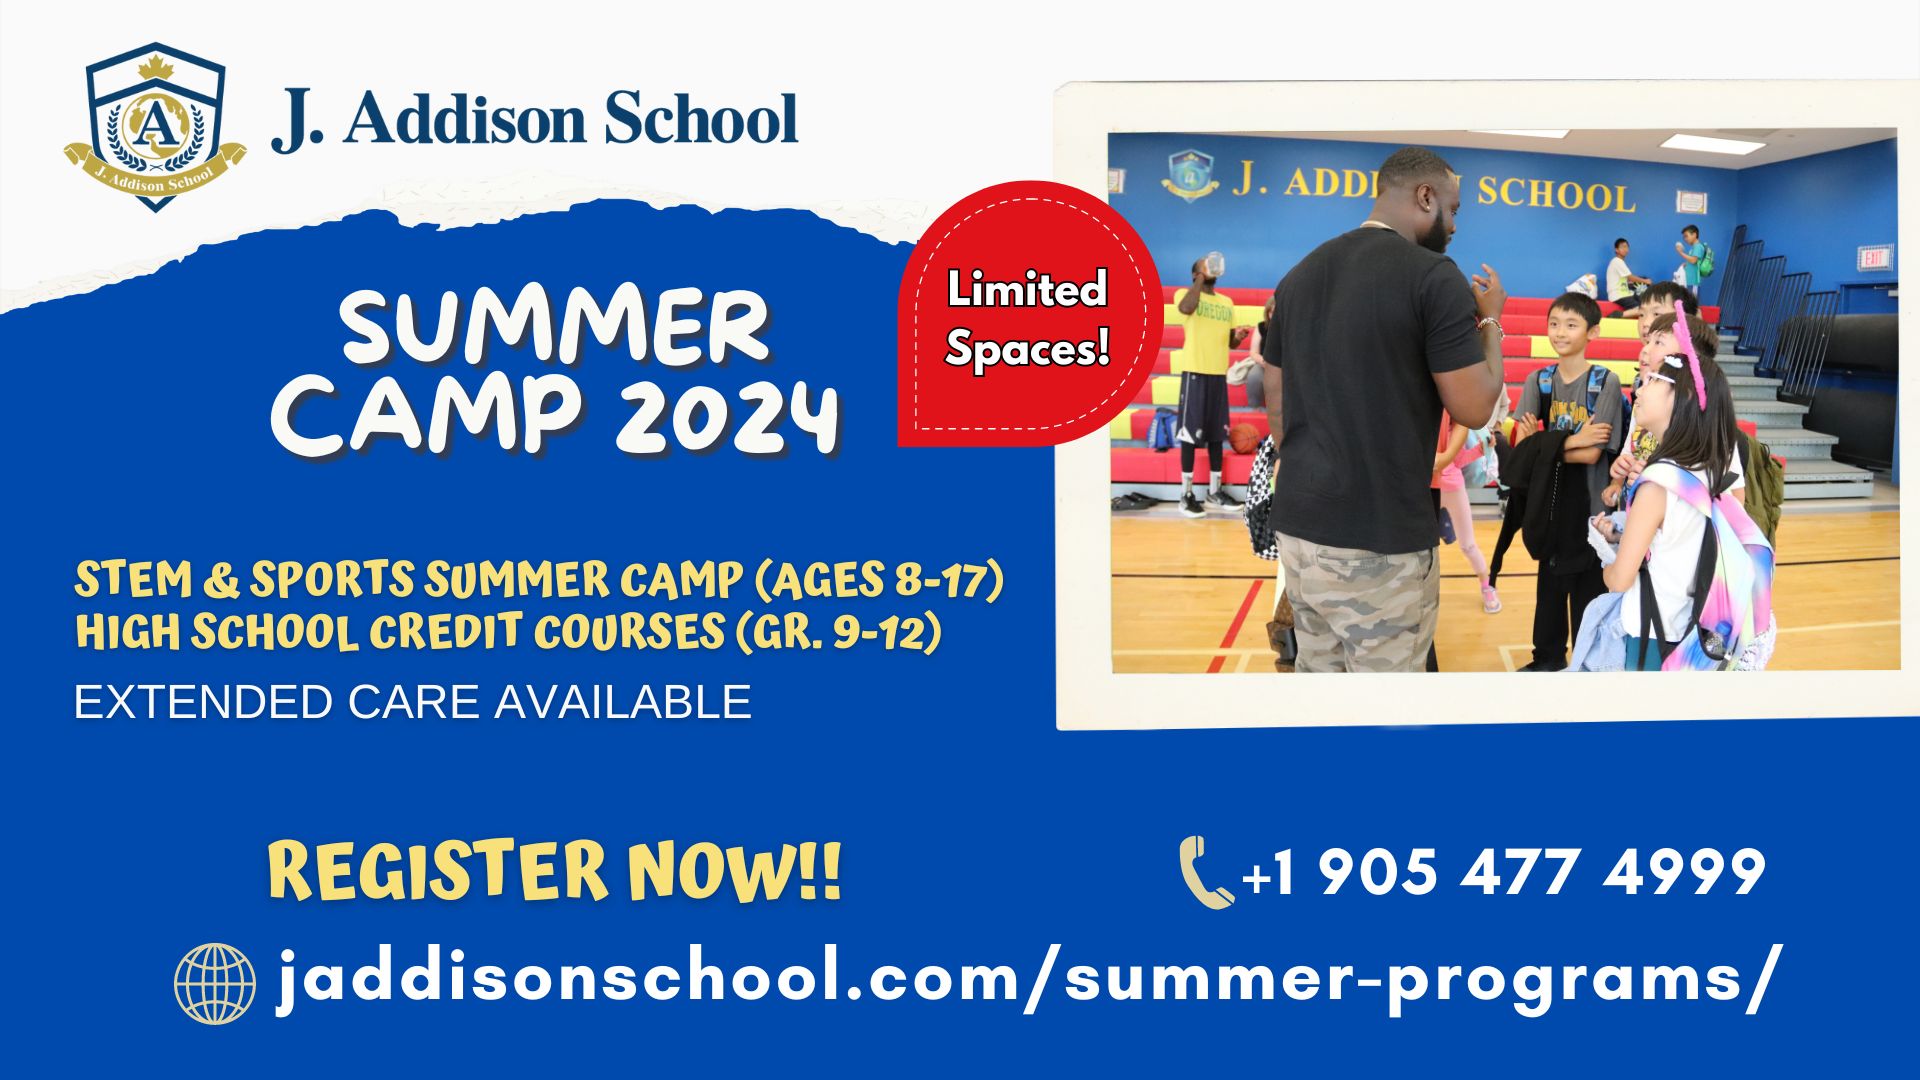 Our Summer Programs are starting!